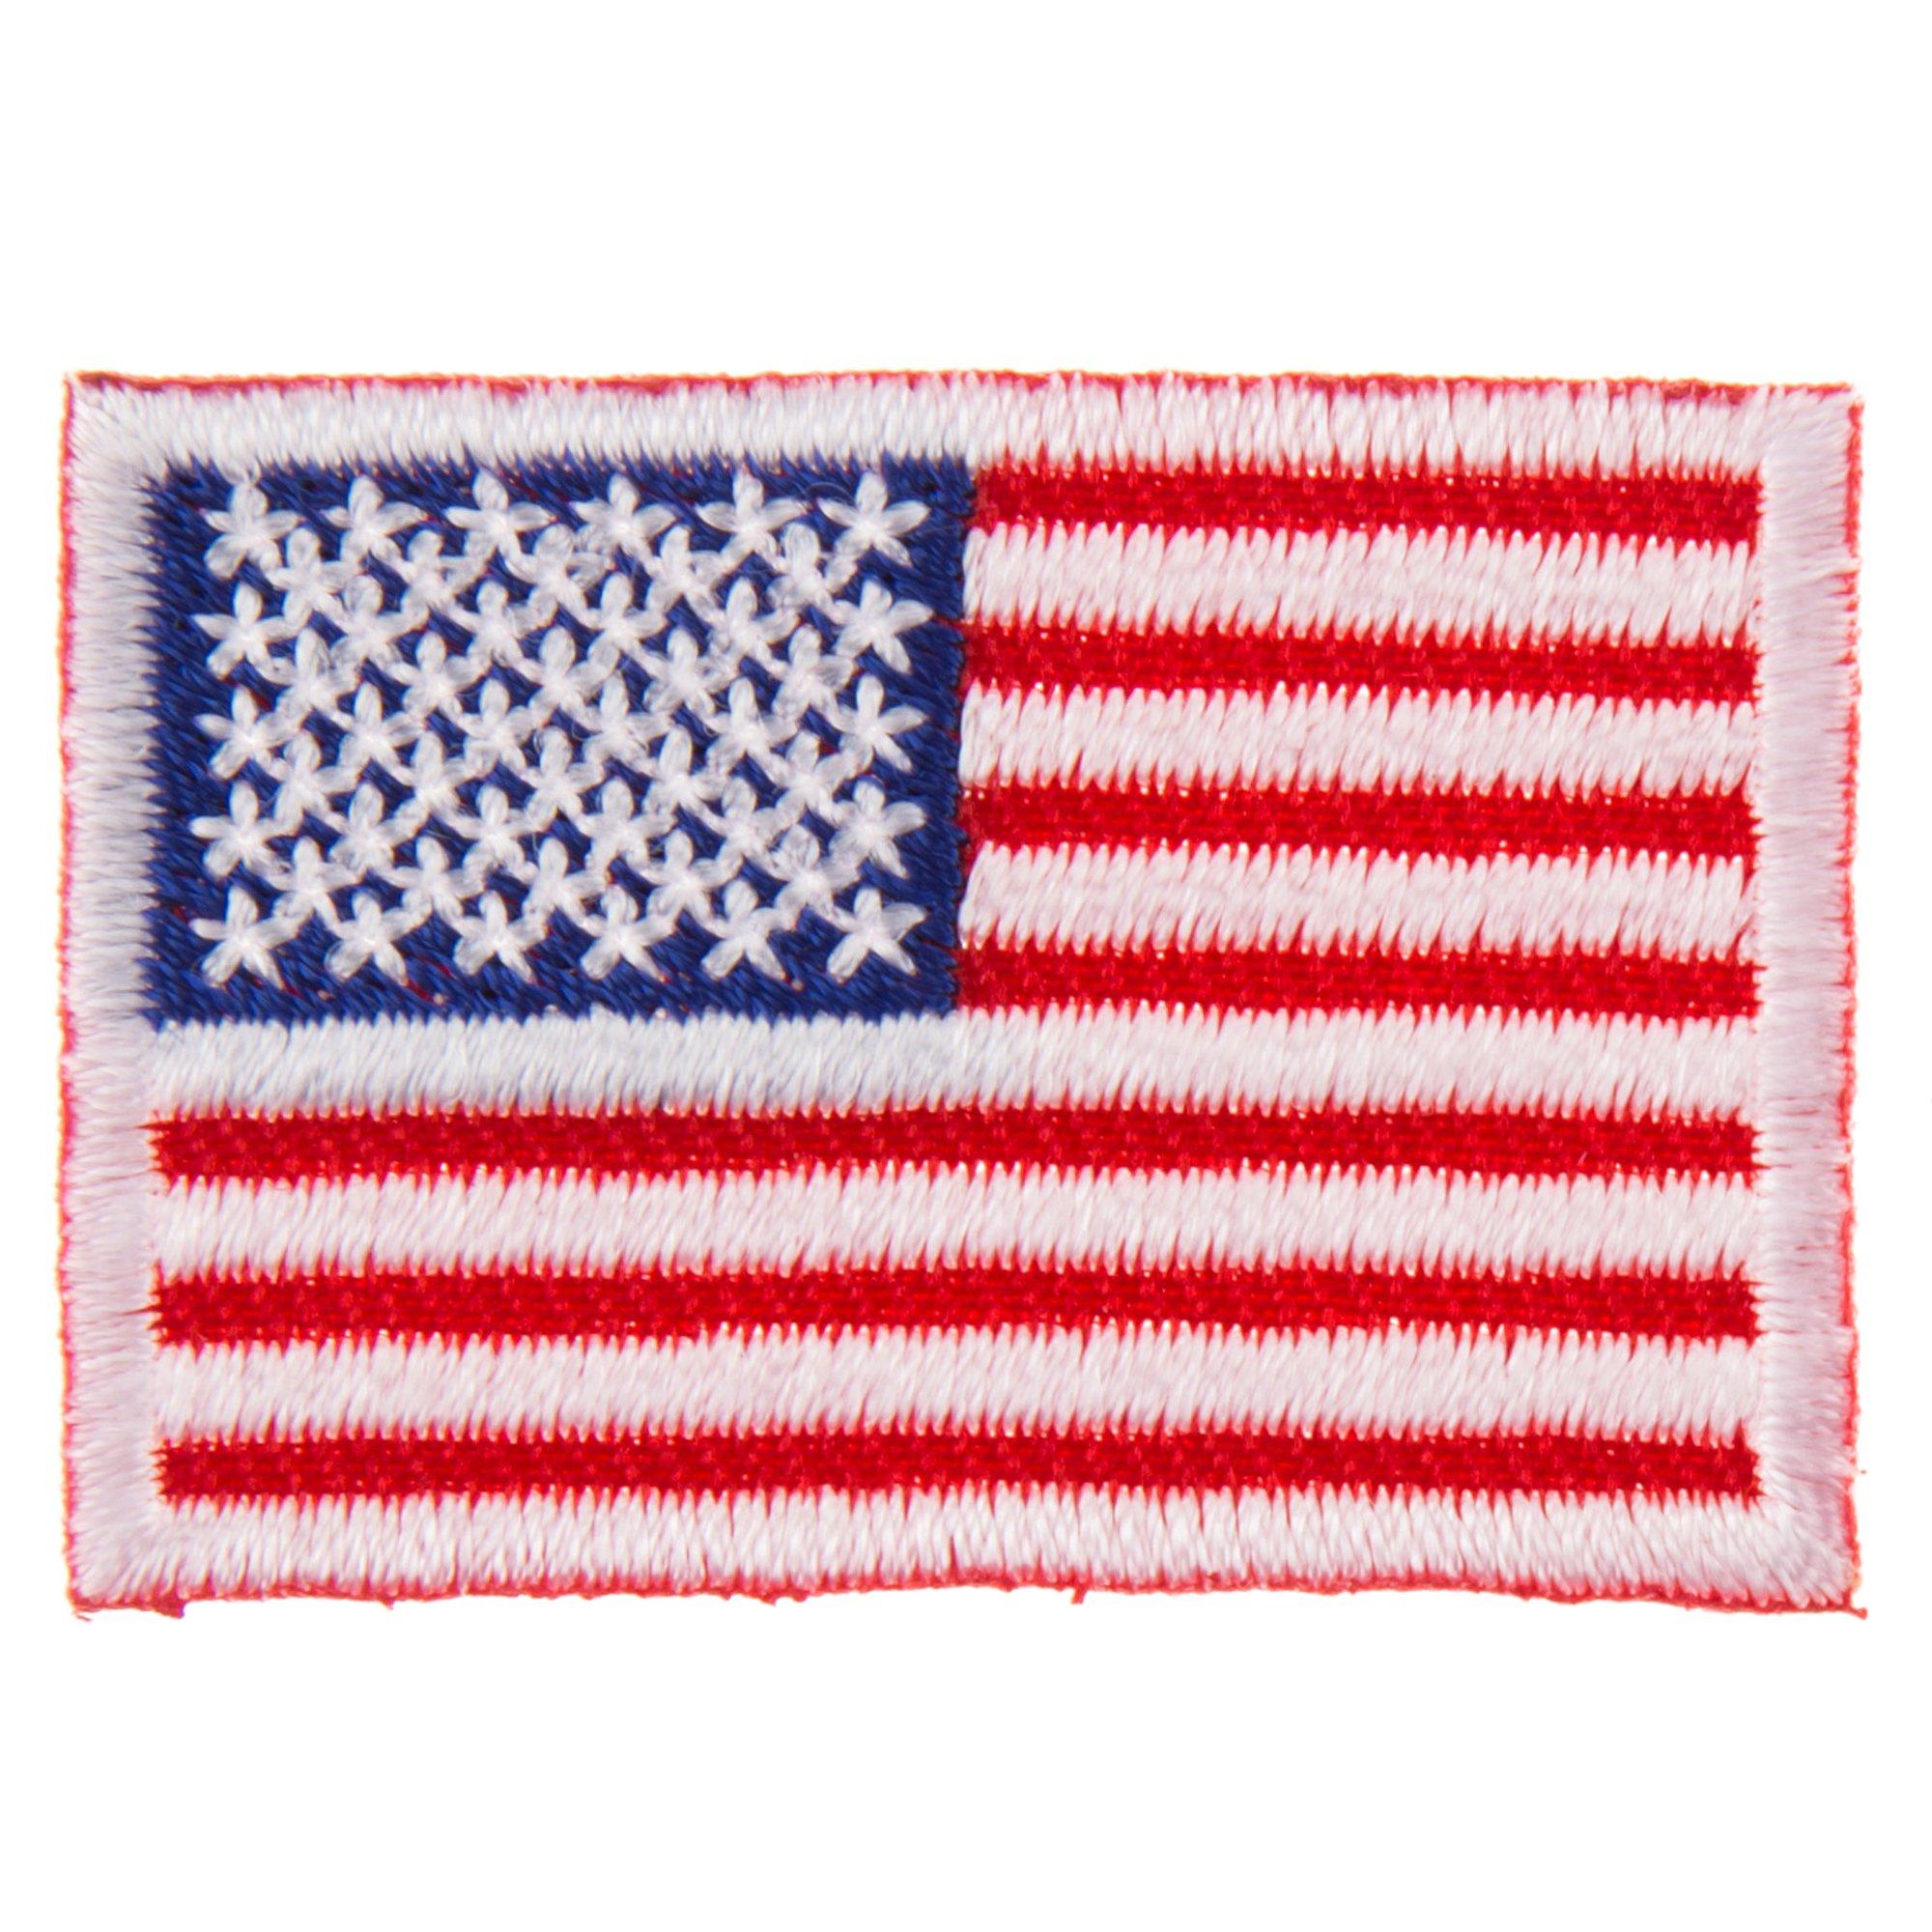 Small American Flag - Gold Border - Iron on Applique/Embroidered Patch 